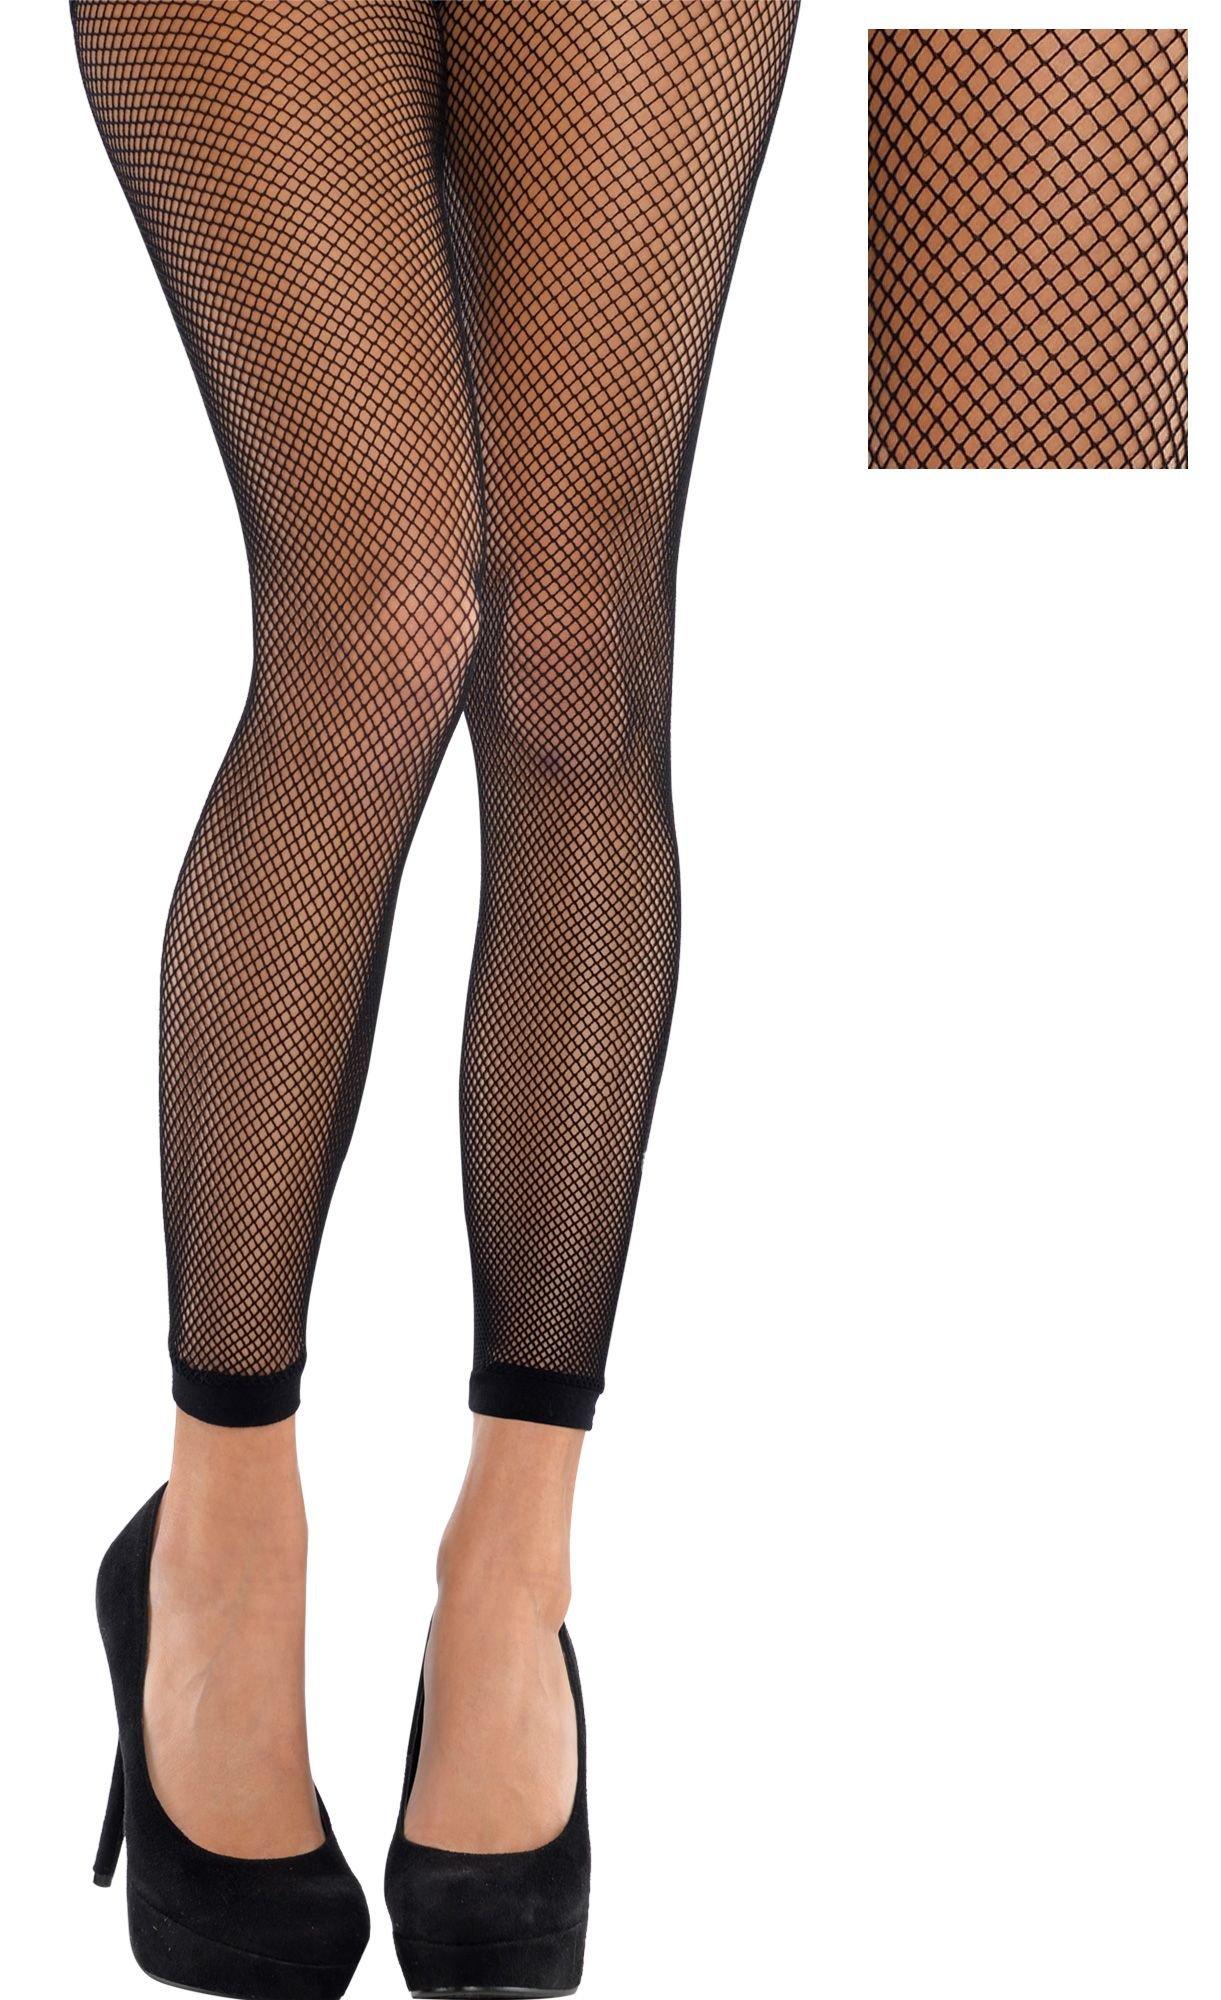 Fishnet Nylons Porn - Adult Black Fishnet Footless Pantyhose | Party City